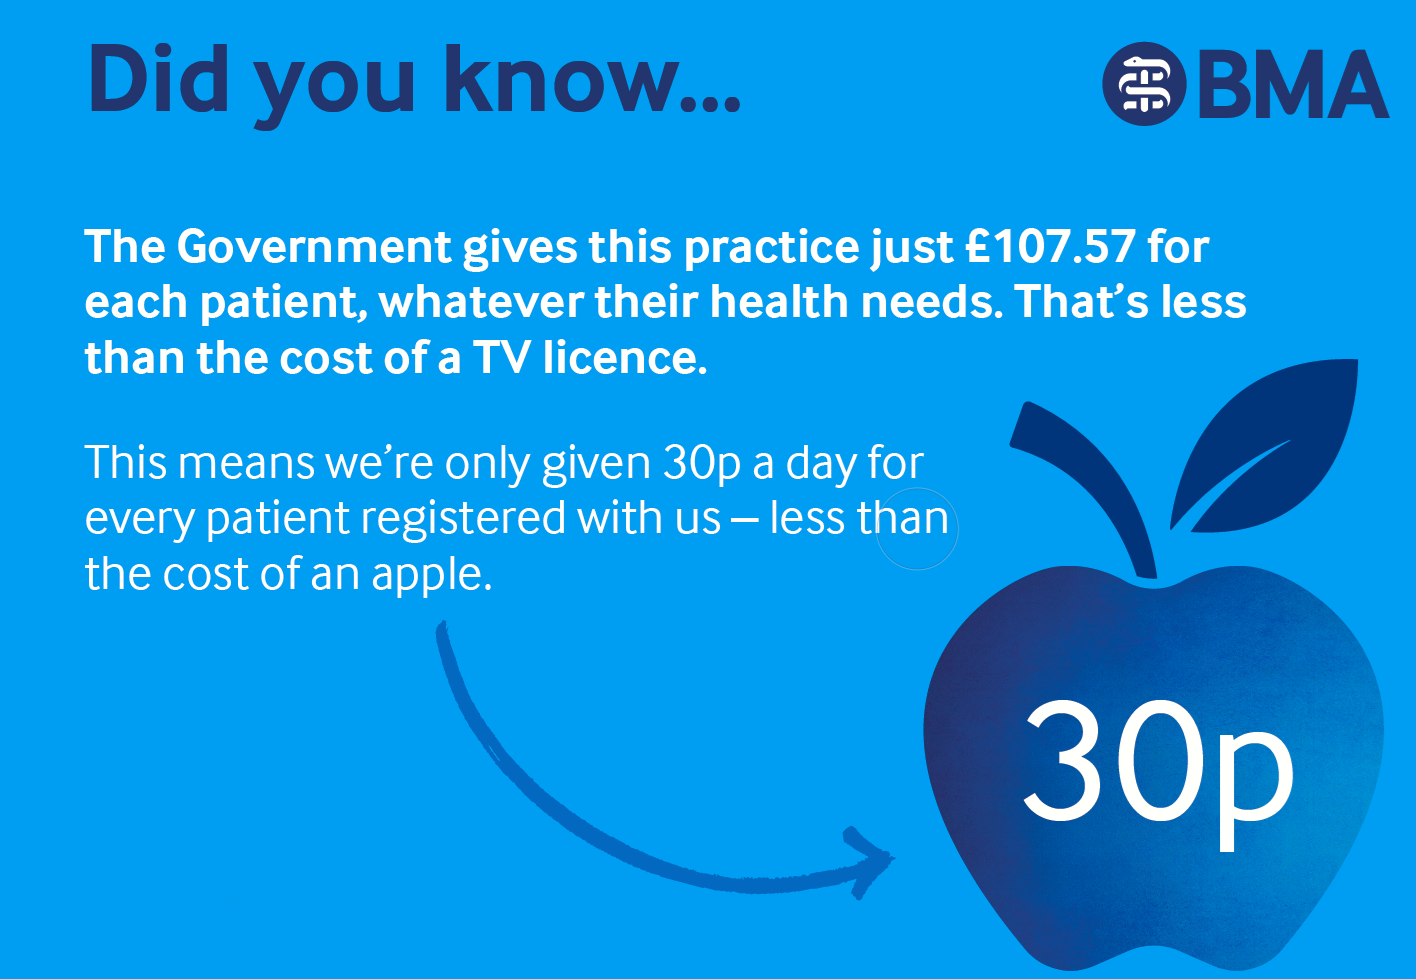 we're only given 30p a day per patient.